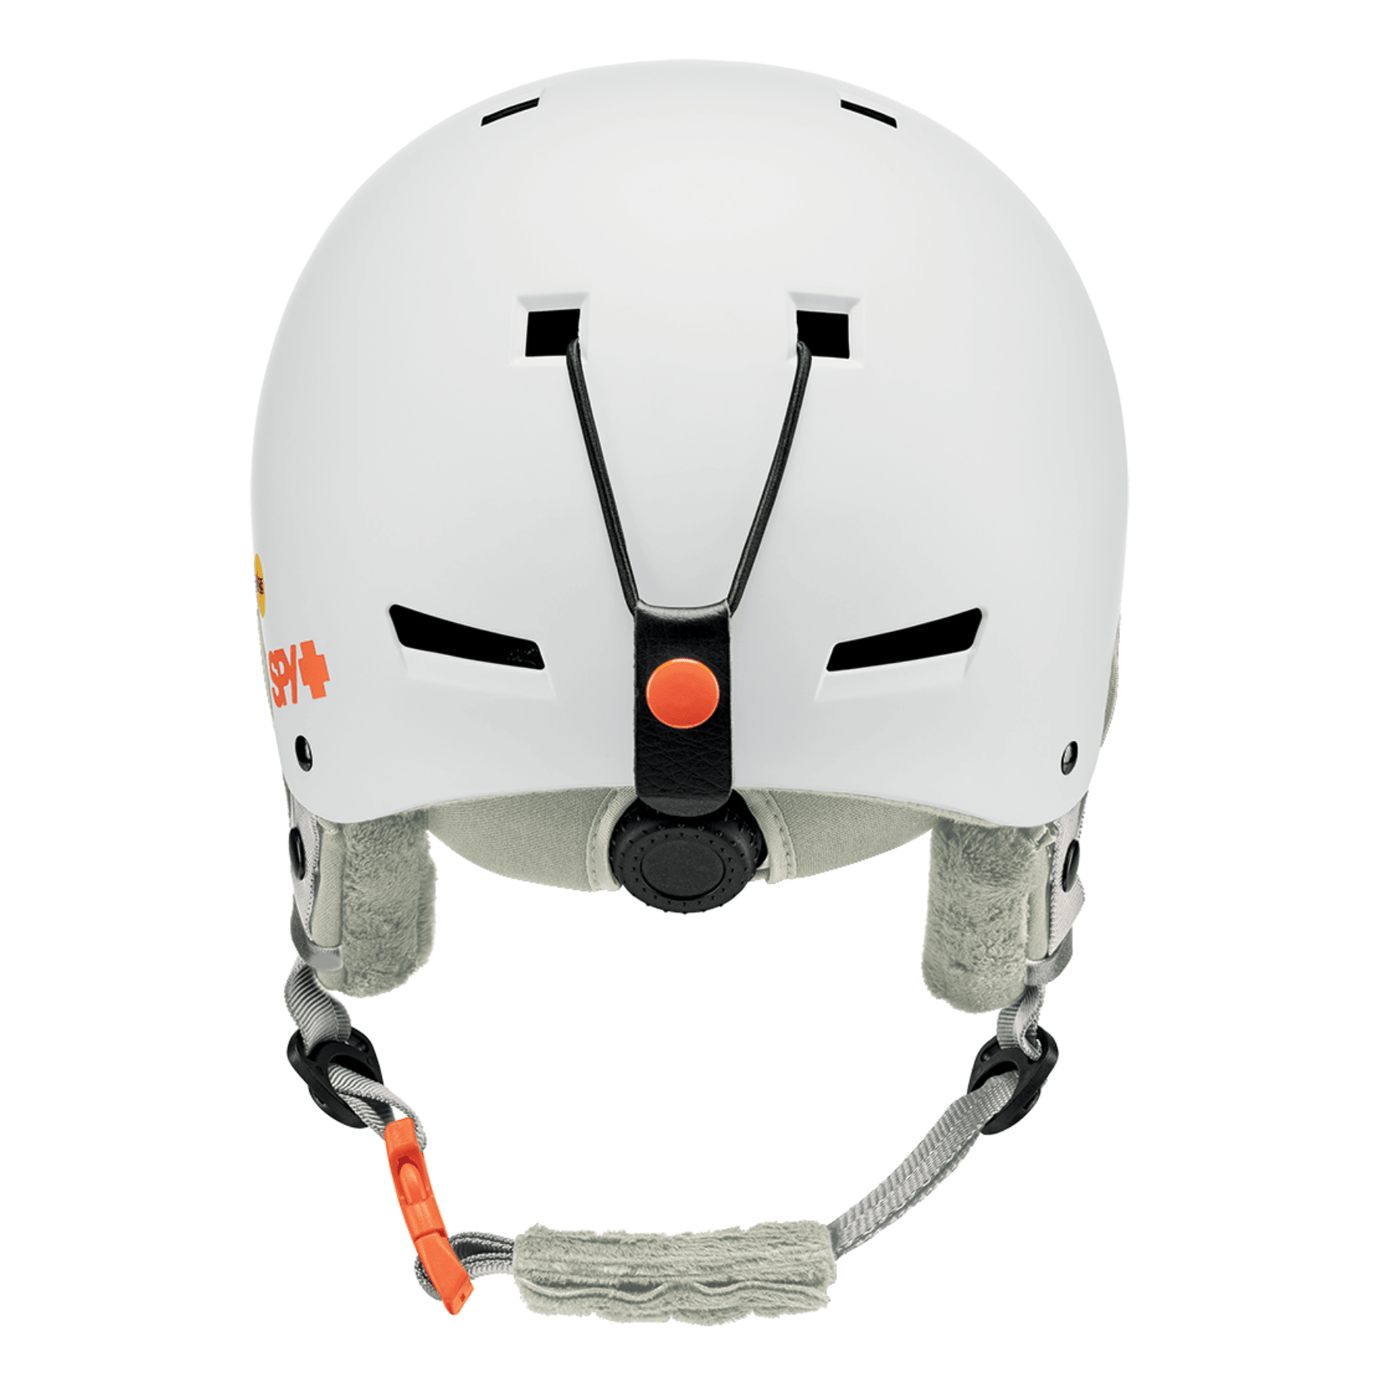 SPY Galactic MIPS Snow Helmet Matte White - Light Gray 8Lines Shop - Fast Shipping